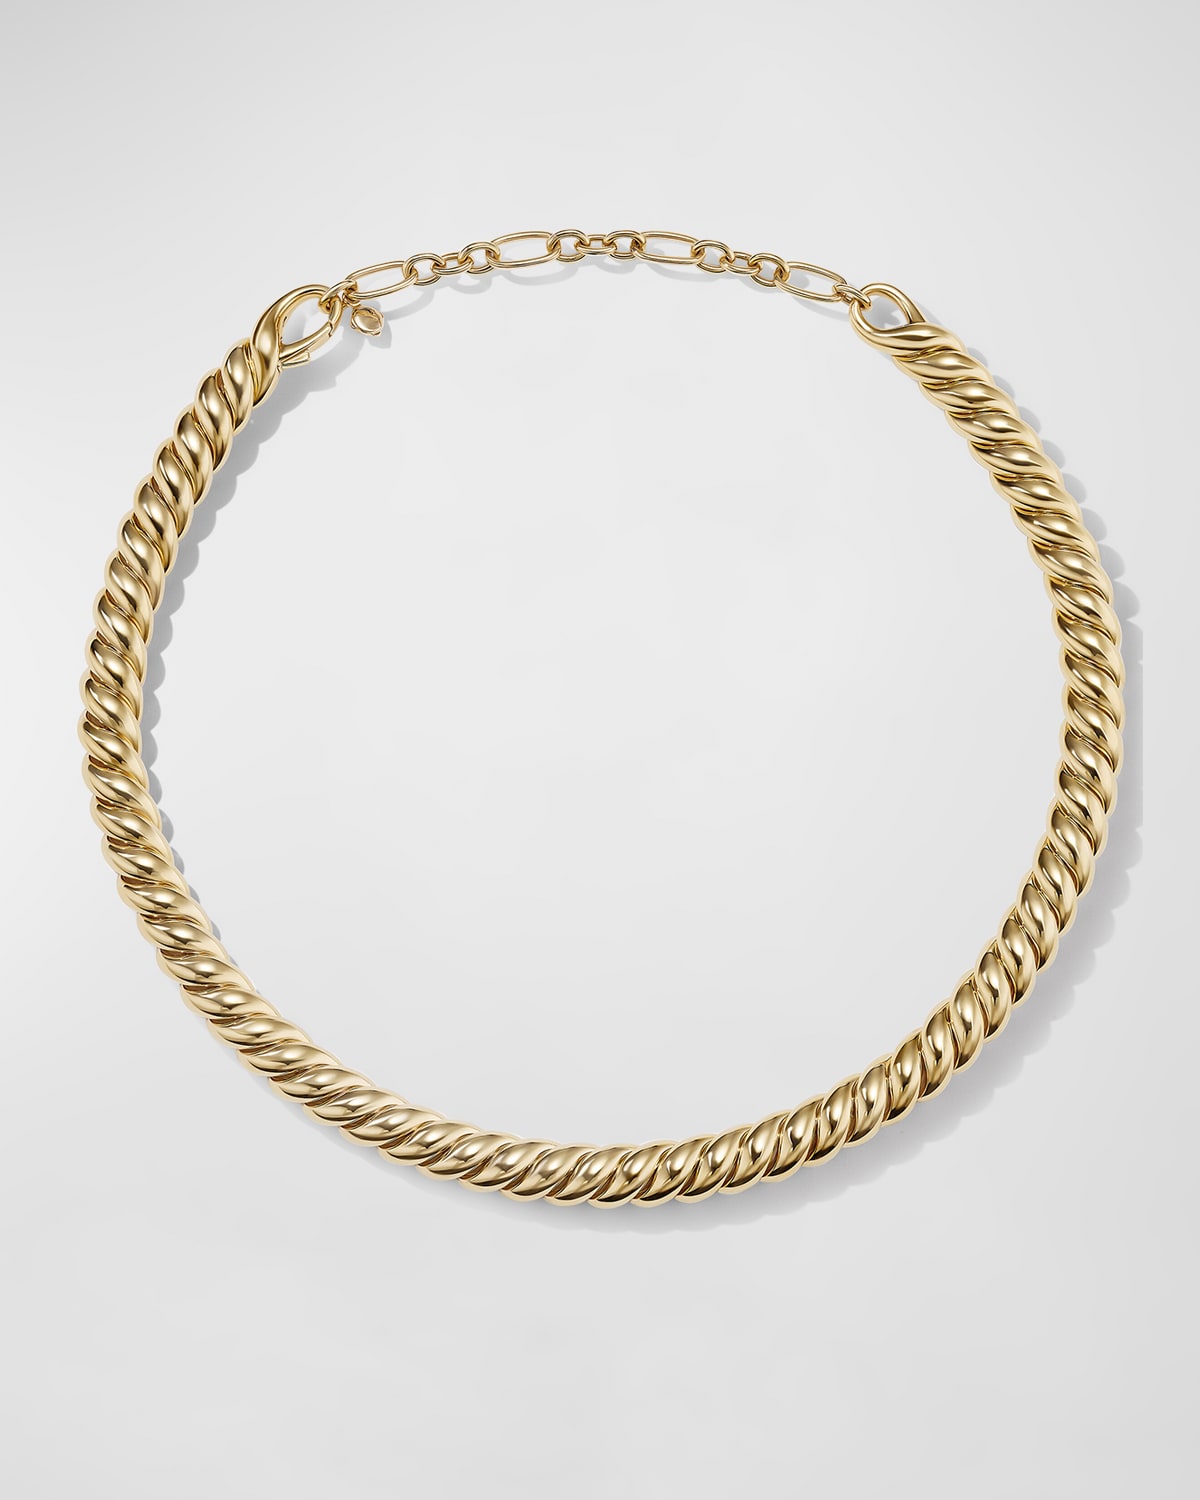 Ben-Amun 24k Gold Electroplated Necklace | Neiman Marcus